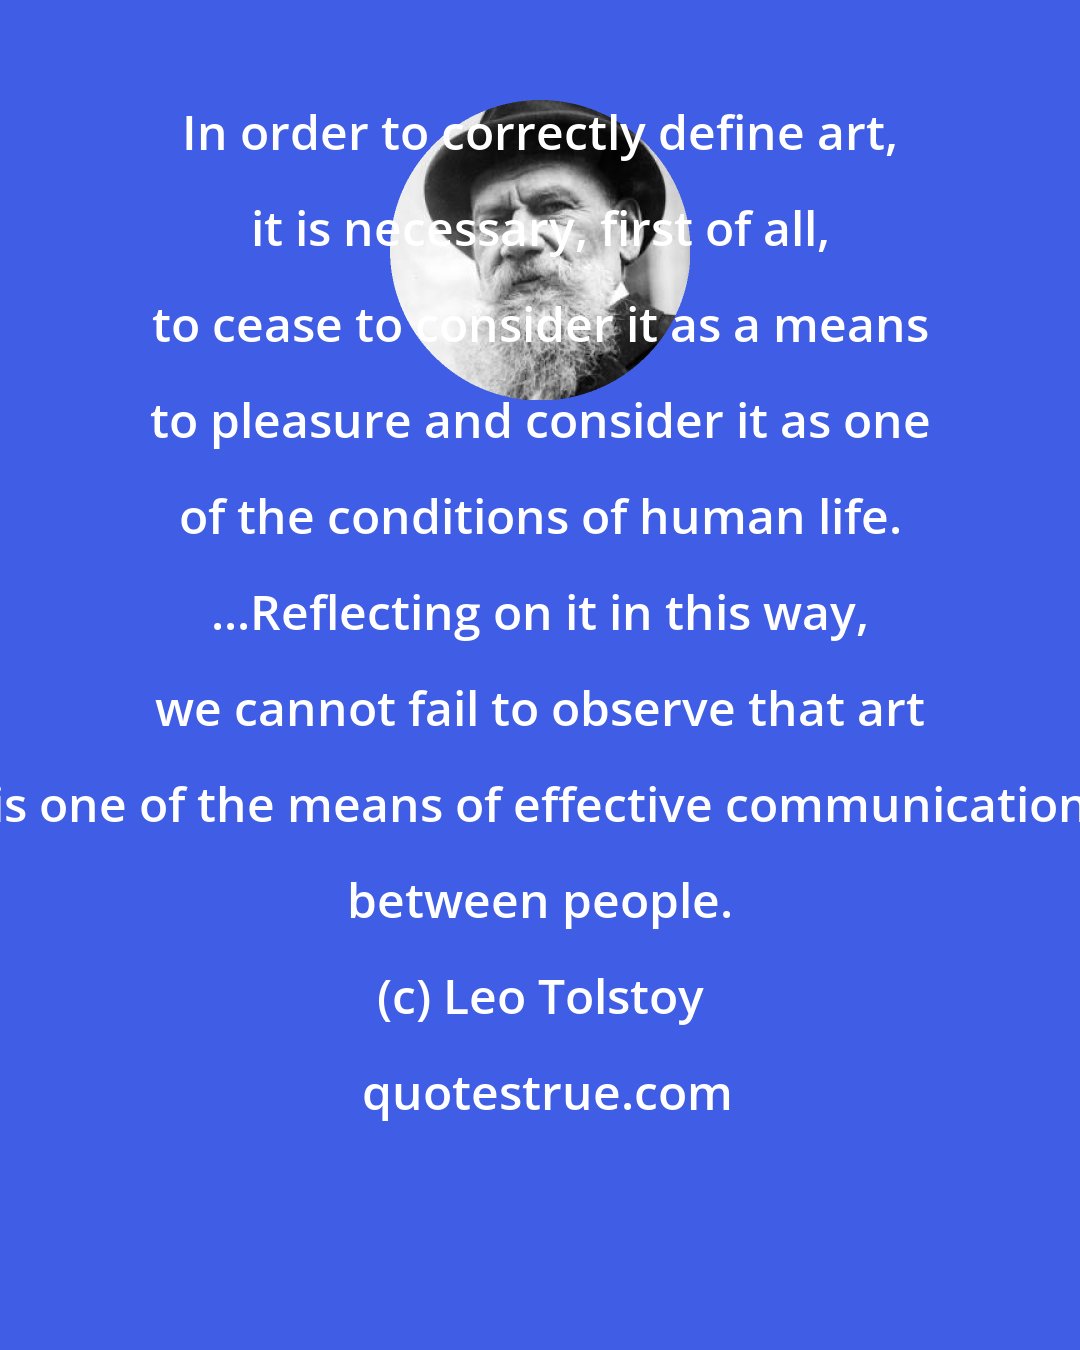 Leo Tolstoy: In order to correctly define art, it is necessary, first of all, to cease to consider it as a means to pleasure and consider it as one of the conditions of human life. ...Reflecting on it in this way, we cannot fail to observe that art is one of the means of effective communication between people.